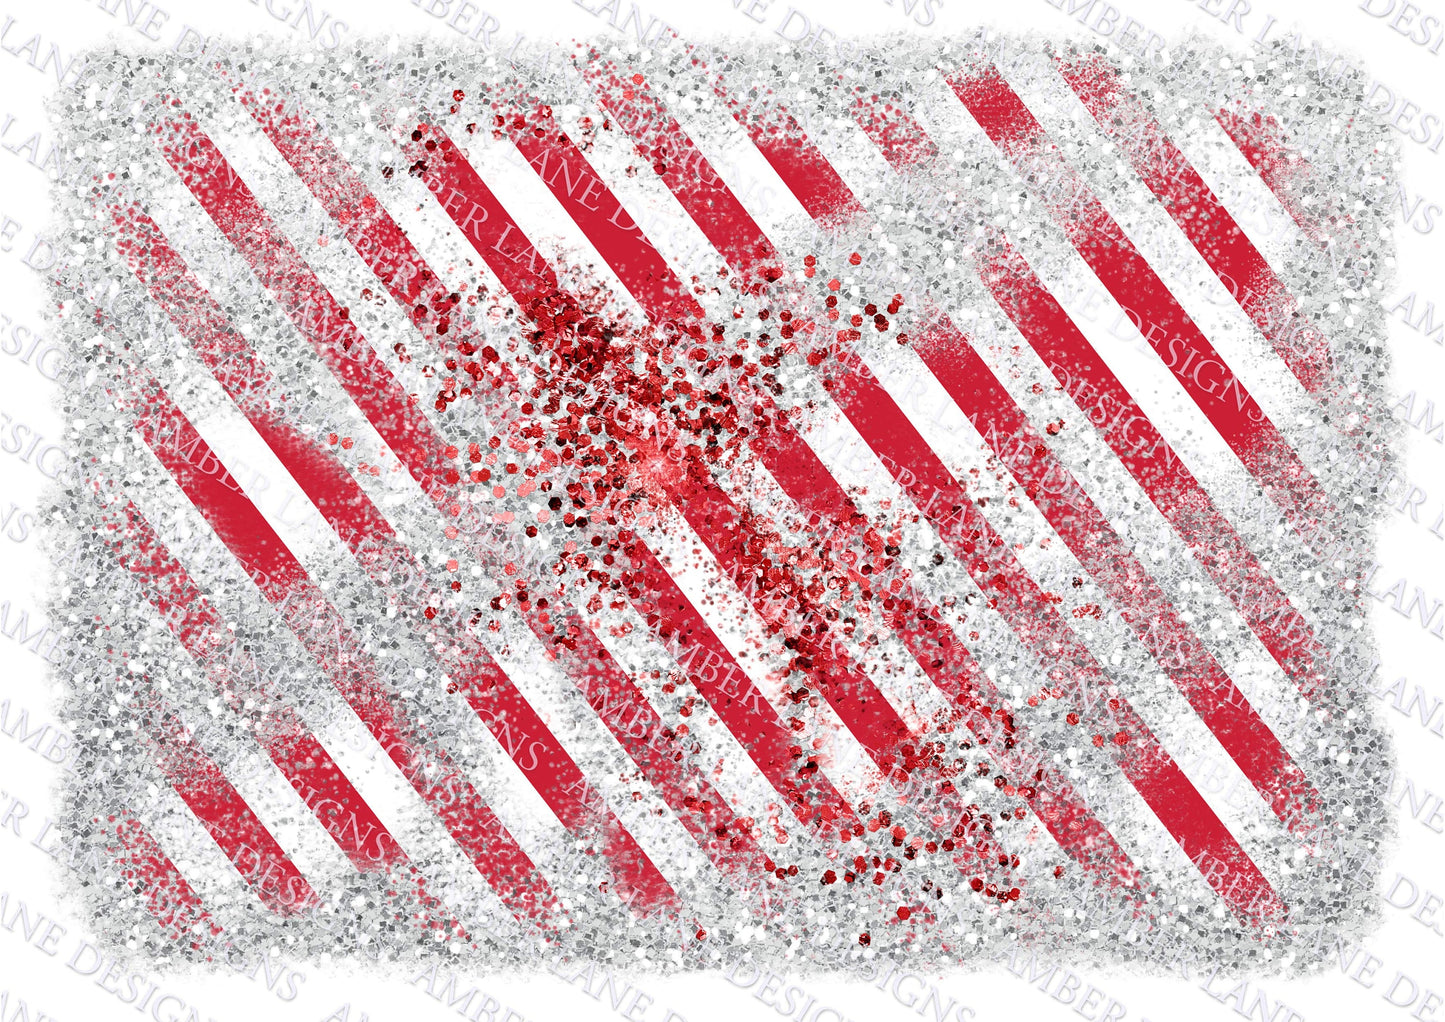 Peppermint candy cane with red and silver glitter, scrapbook background, png file